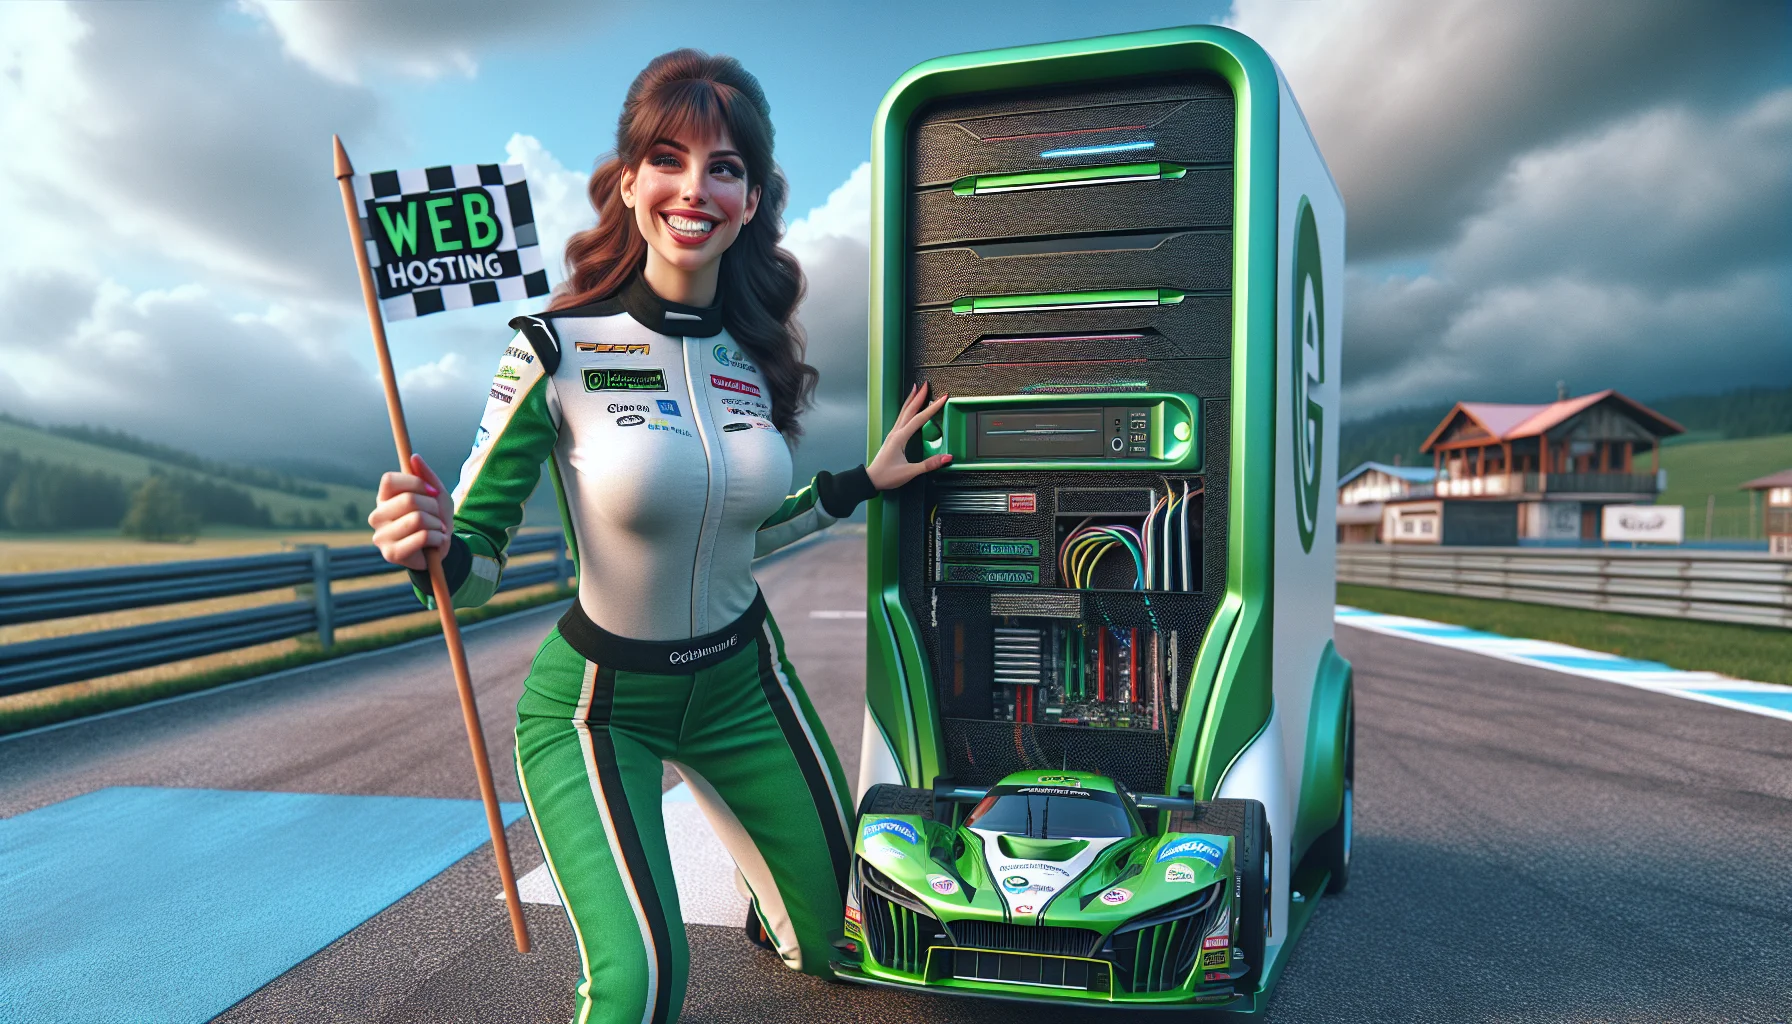 Create a realistic image of a female professional car racing driver, who has brunette hair, standing next to a giant, comical computer tower that is almost as big as she is. The computer tower is customised to look like a fast, green race car. She grins playfully and holds a flag that says 'Web Hosting'. She's wearing her racing suit which is also green and has clever subtle designs that suggest speed and digital concepts. The setting is a racing track and the sky is a clear blue adding to the whimsical scene.